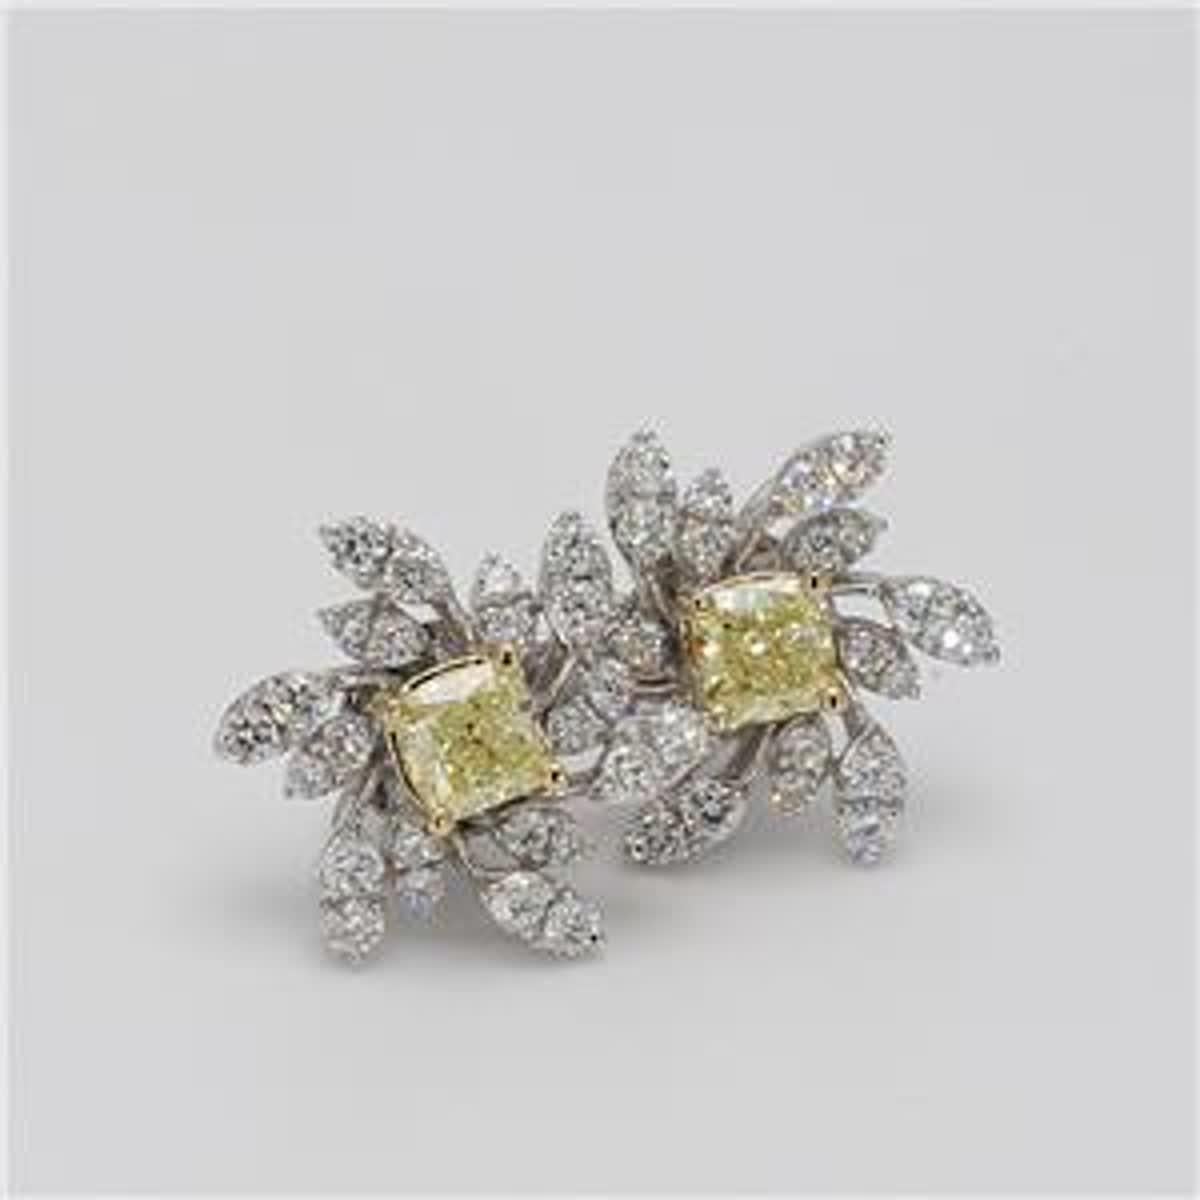 Natural Yellow Cushion and White Diamond 1.43 Carat TW Gold Stud Earrings 1